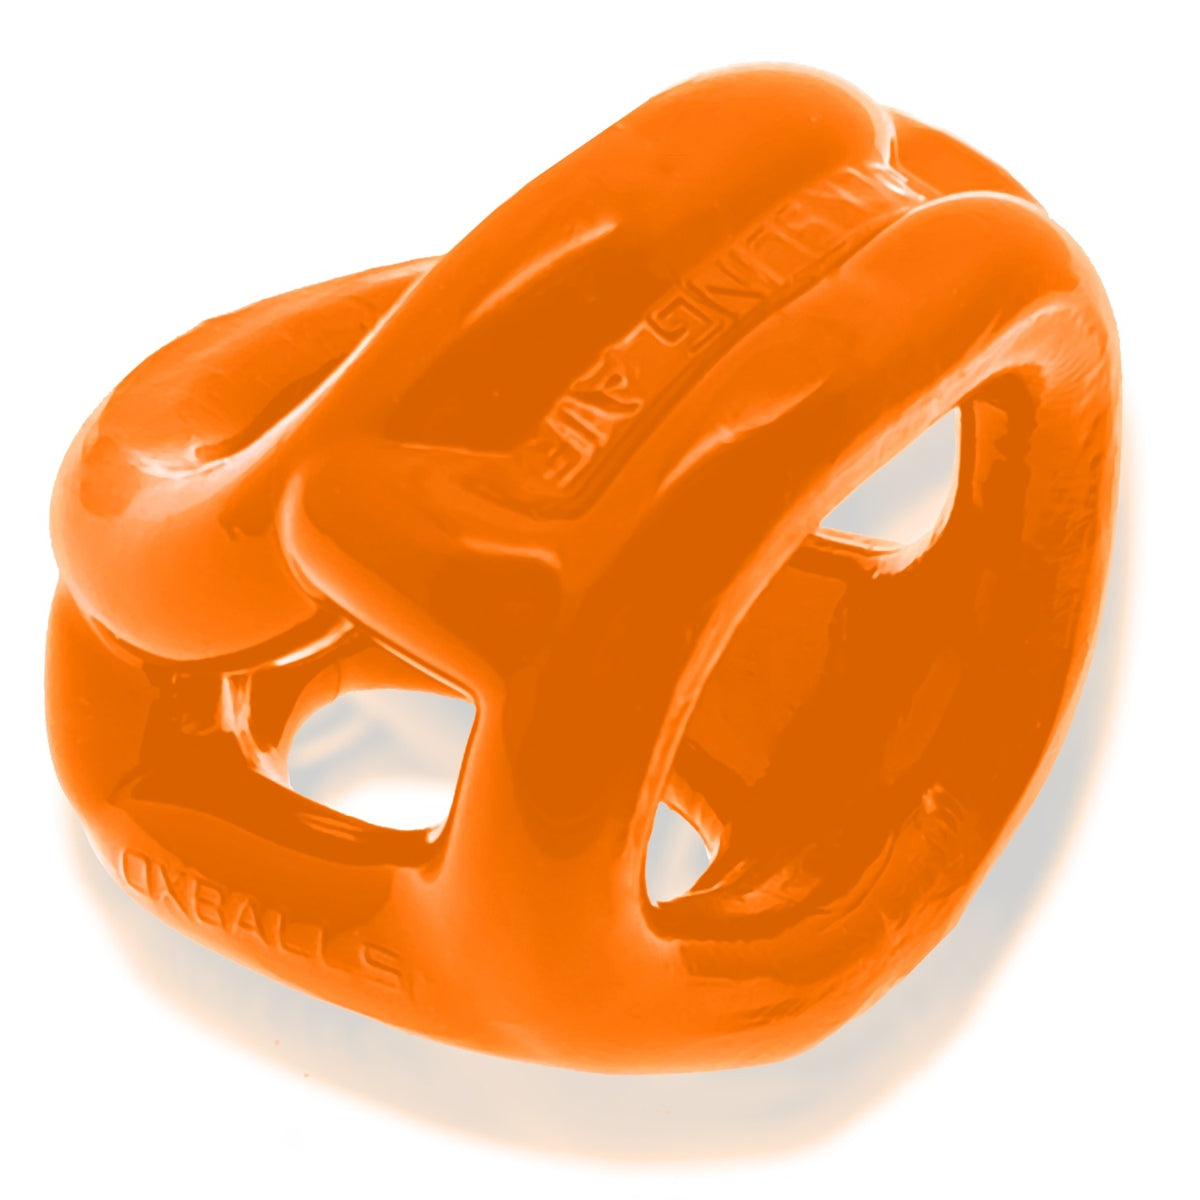 Oxballs Cocksling Air Cock Ring Ball Stretcher Orange (8251336949999)